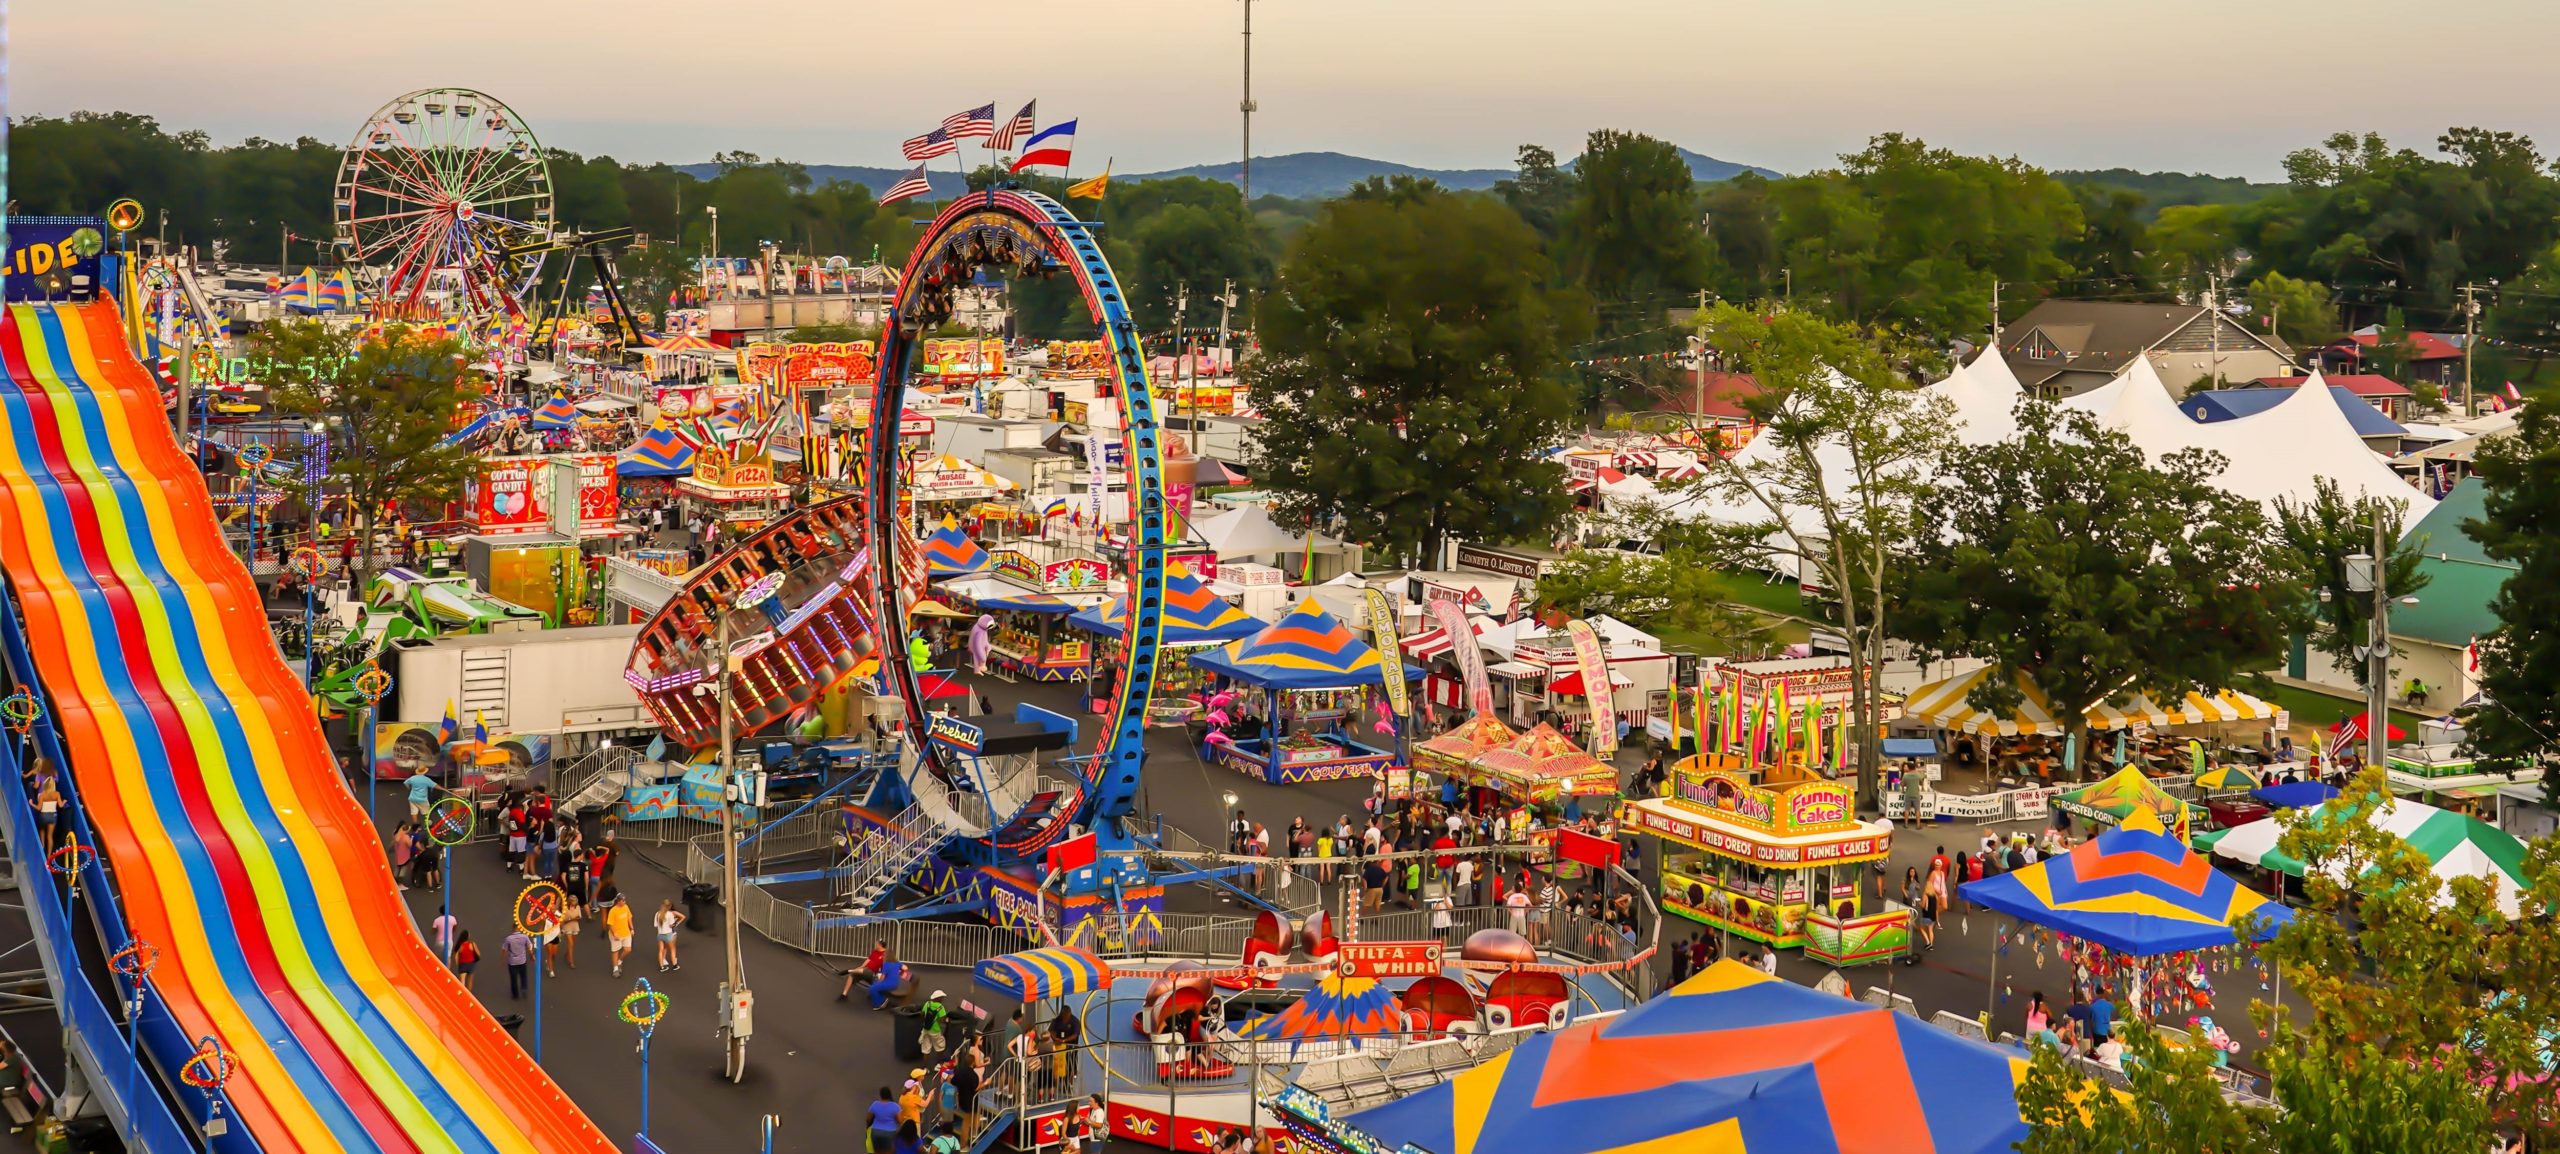 Wilson Co. Fair Tennessee State Fair to celebrate all 95 counties